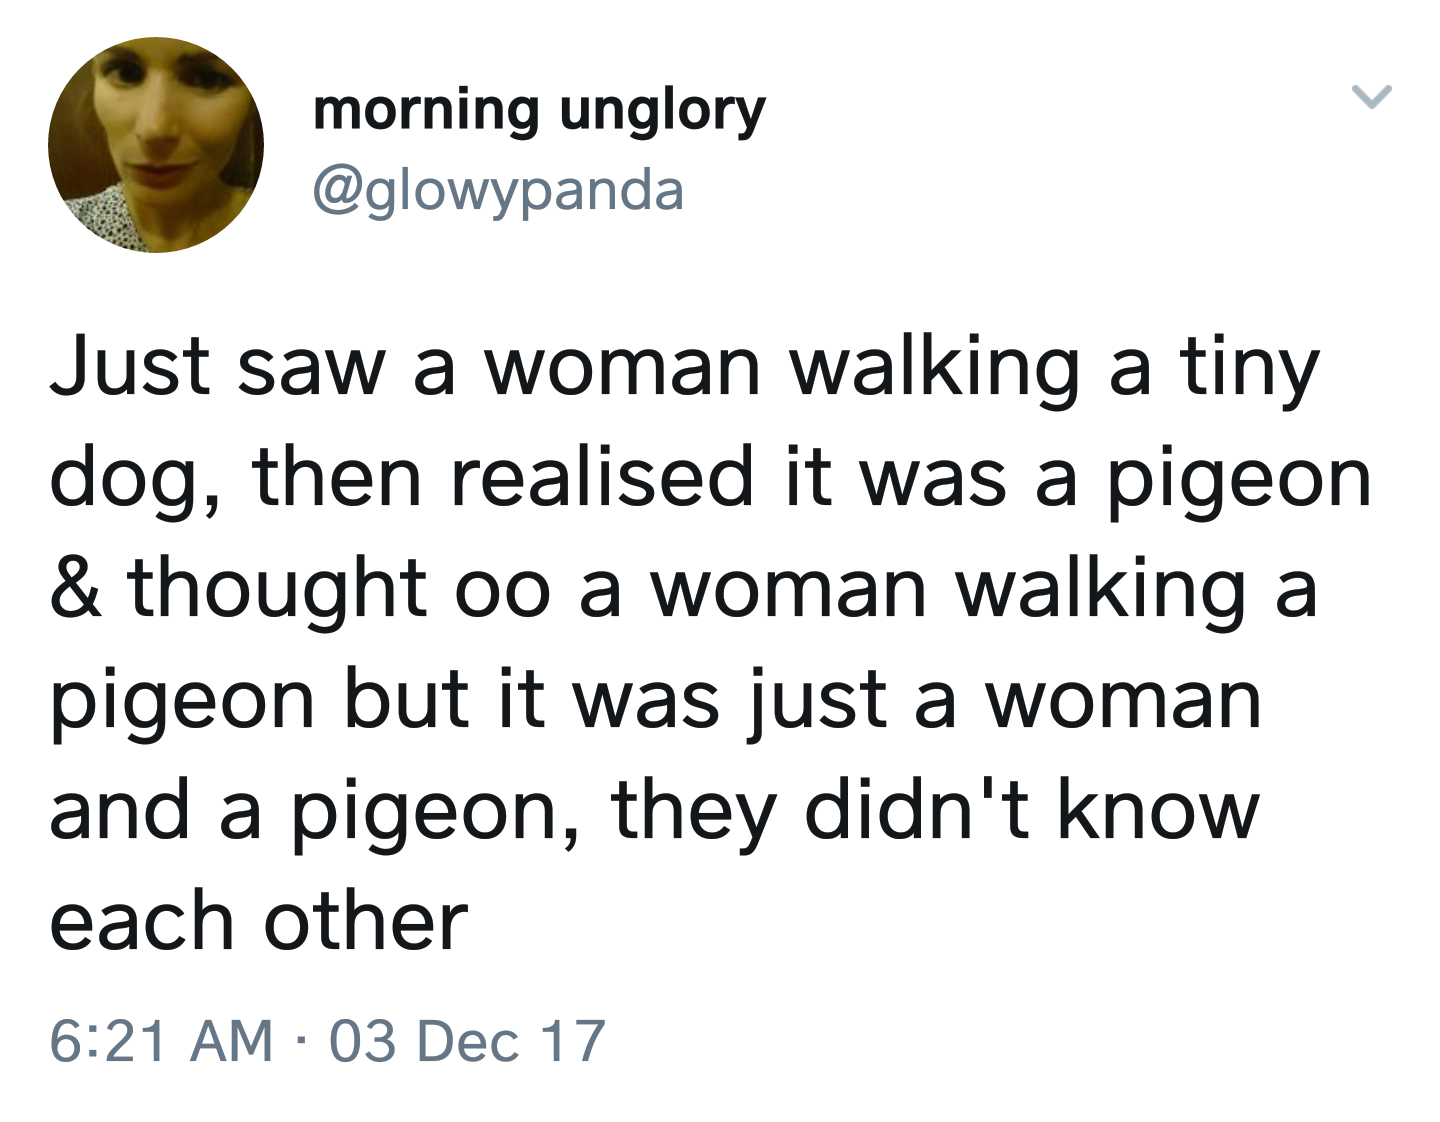 memes - you get another chance in the simulation - morning unglory Just saw a woman walking a tiny dog, then realised it was a pigeon & thought oo a woman walking a pigeon but it was just a woman and a pigeon, they didn't know each other 03 Dec 17